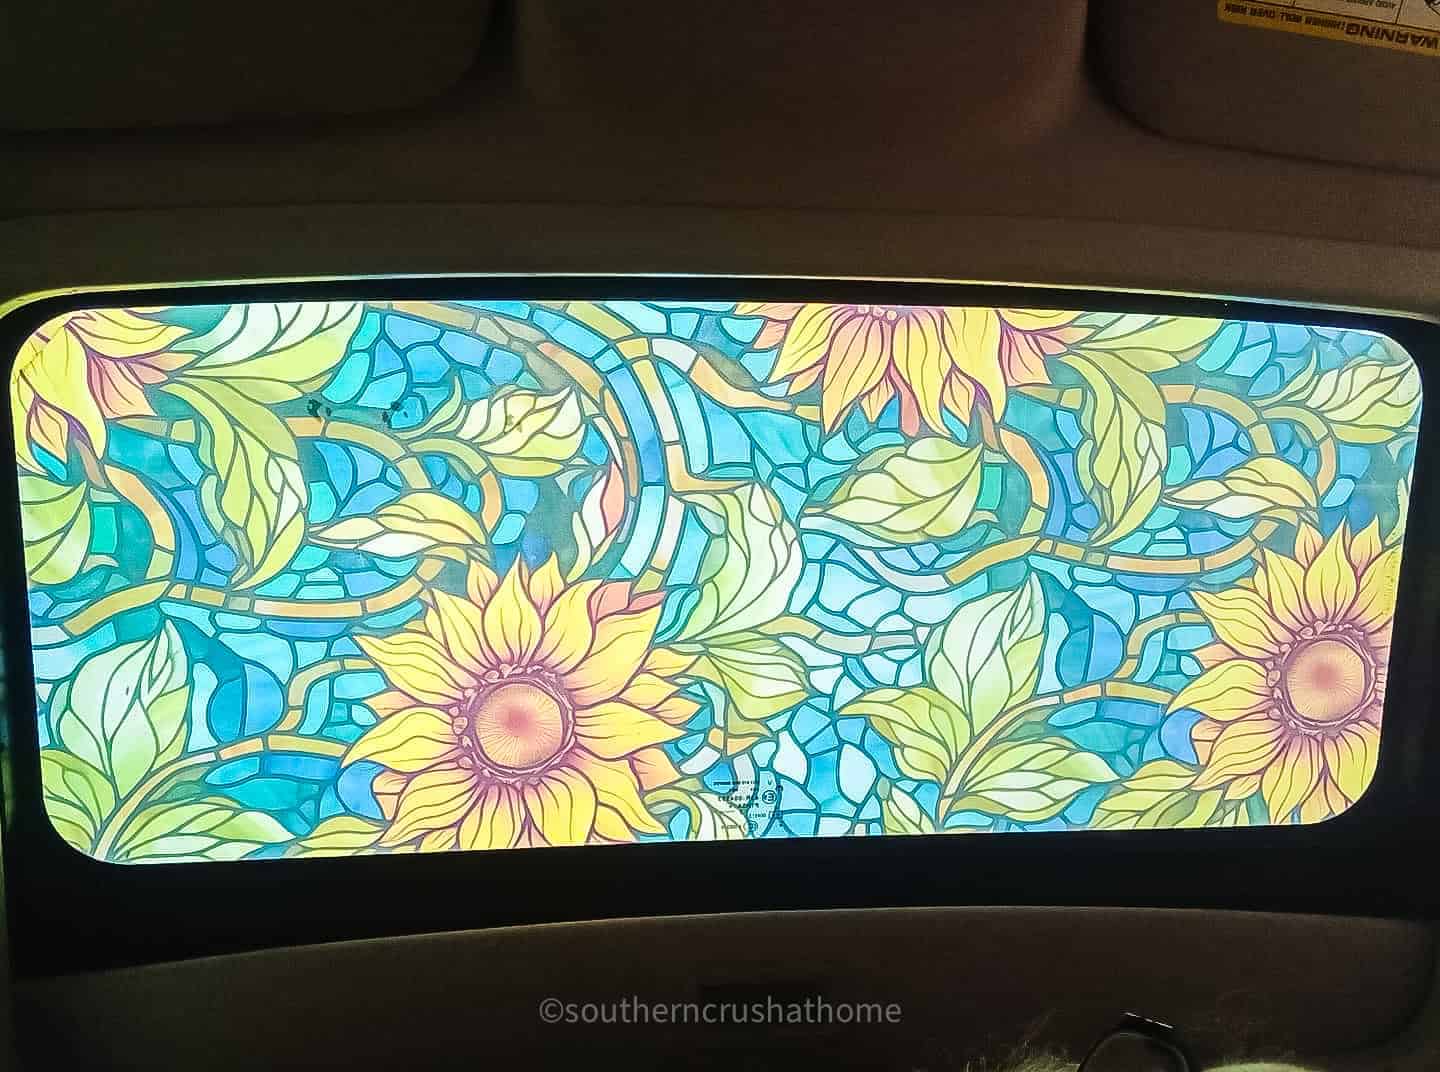 sunflowers stained glass window film on sunroof